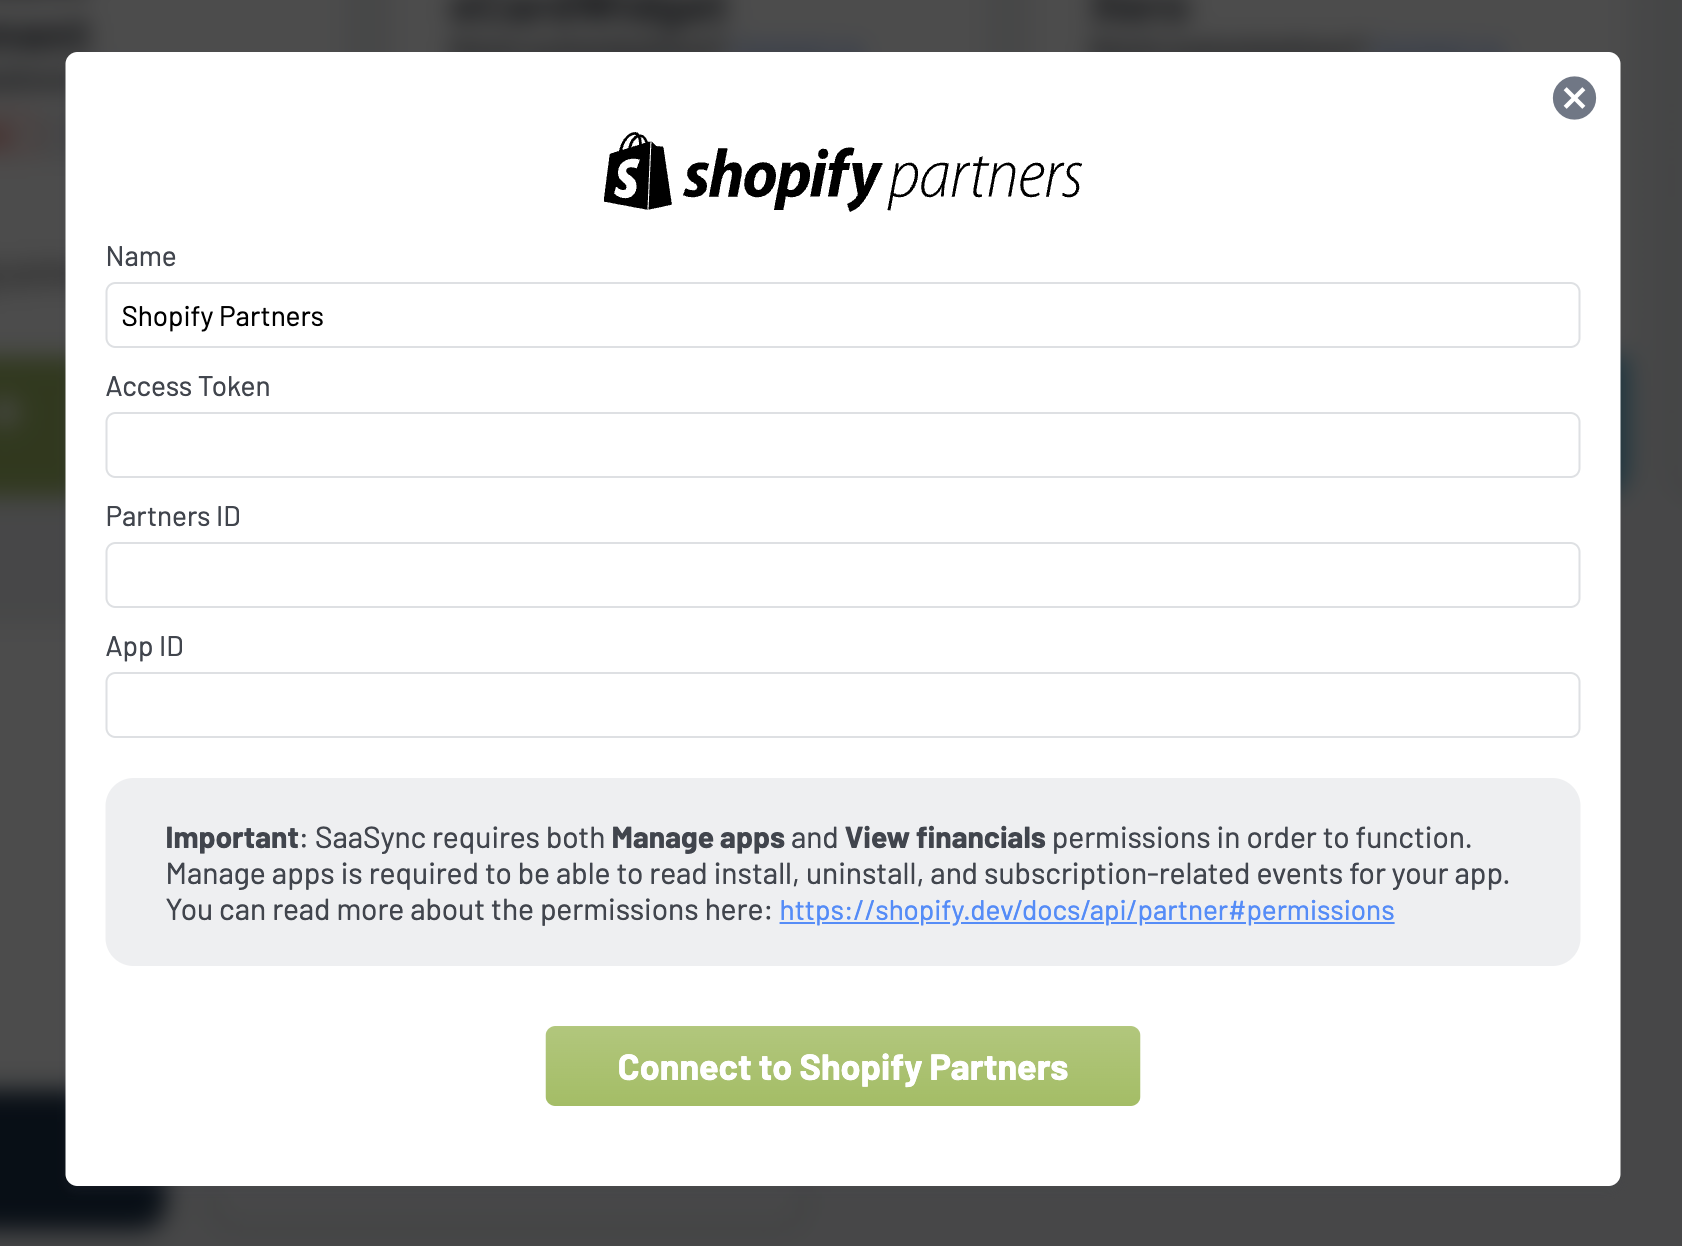 SaaSync Shopify Partners Connection